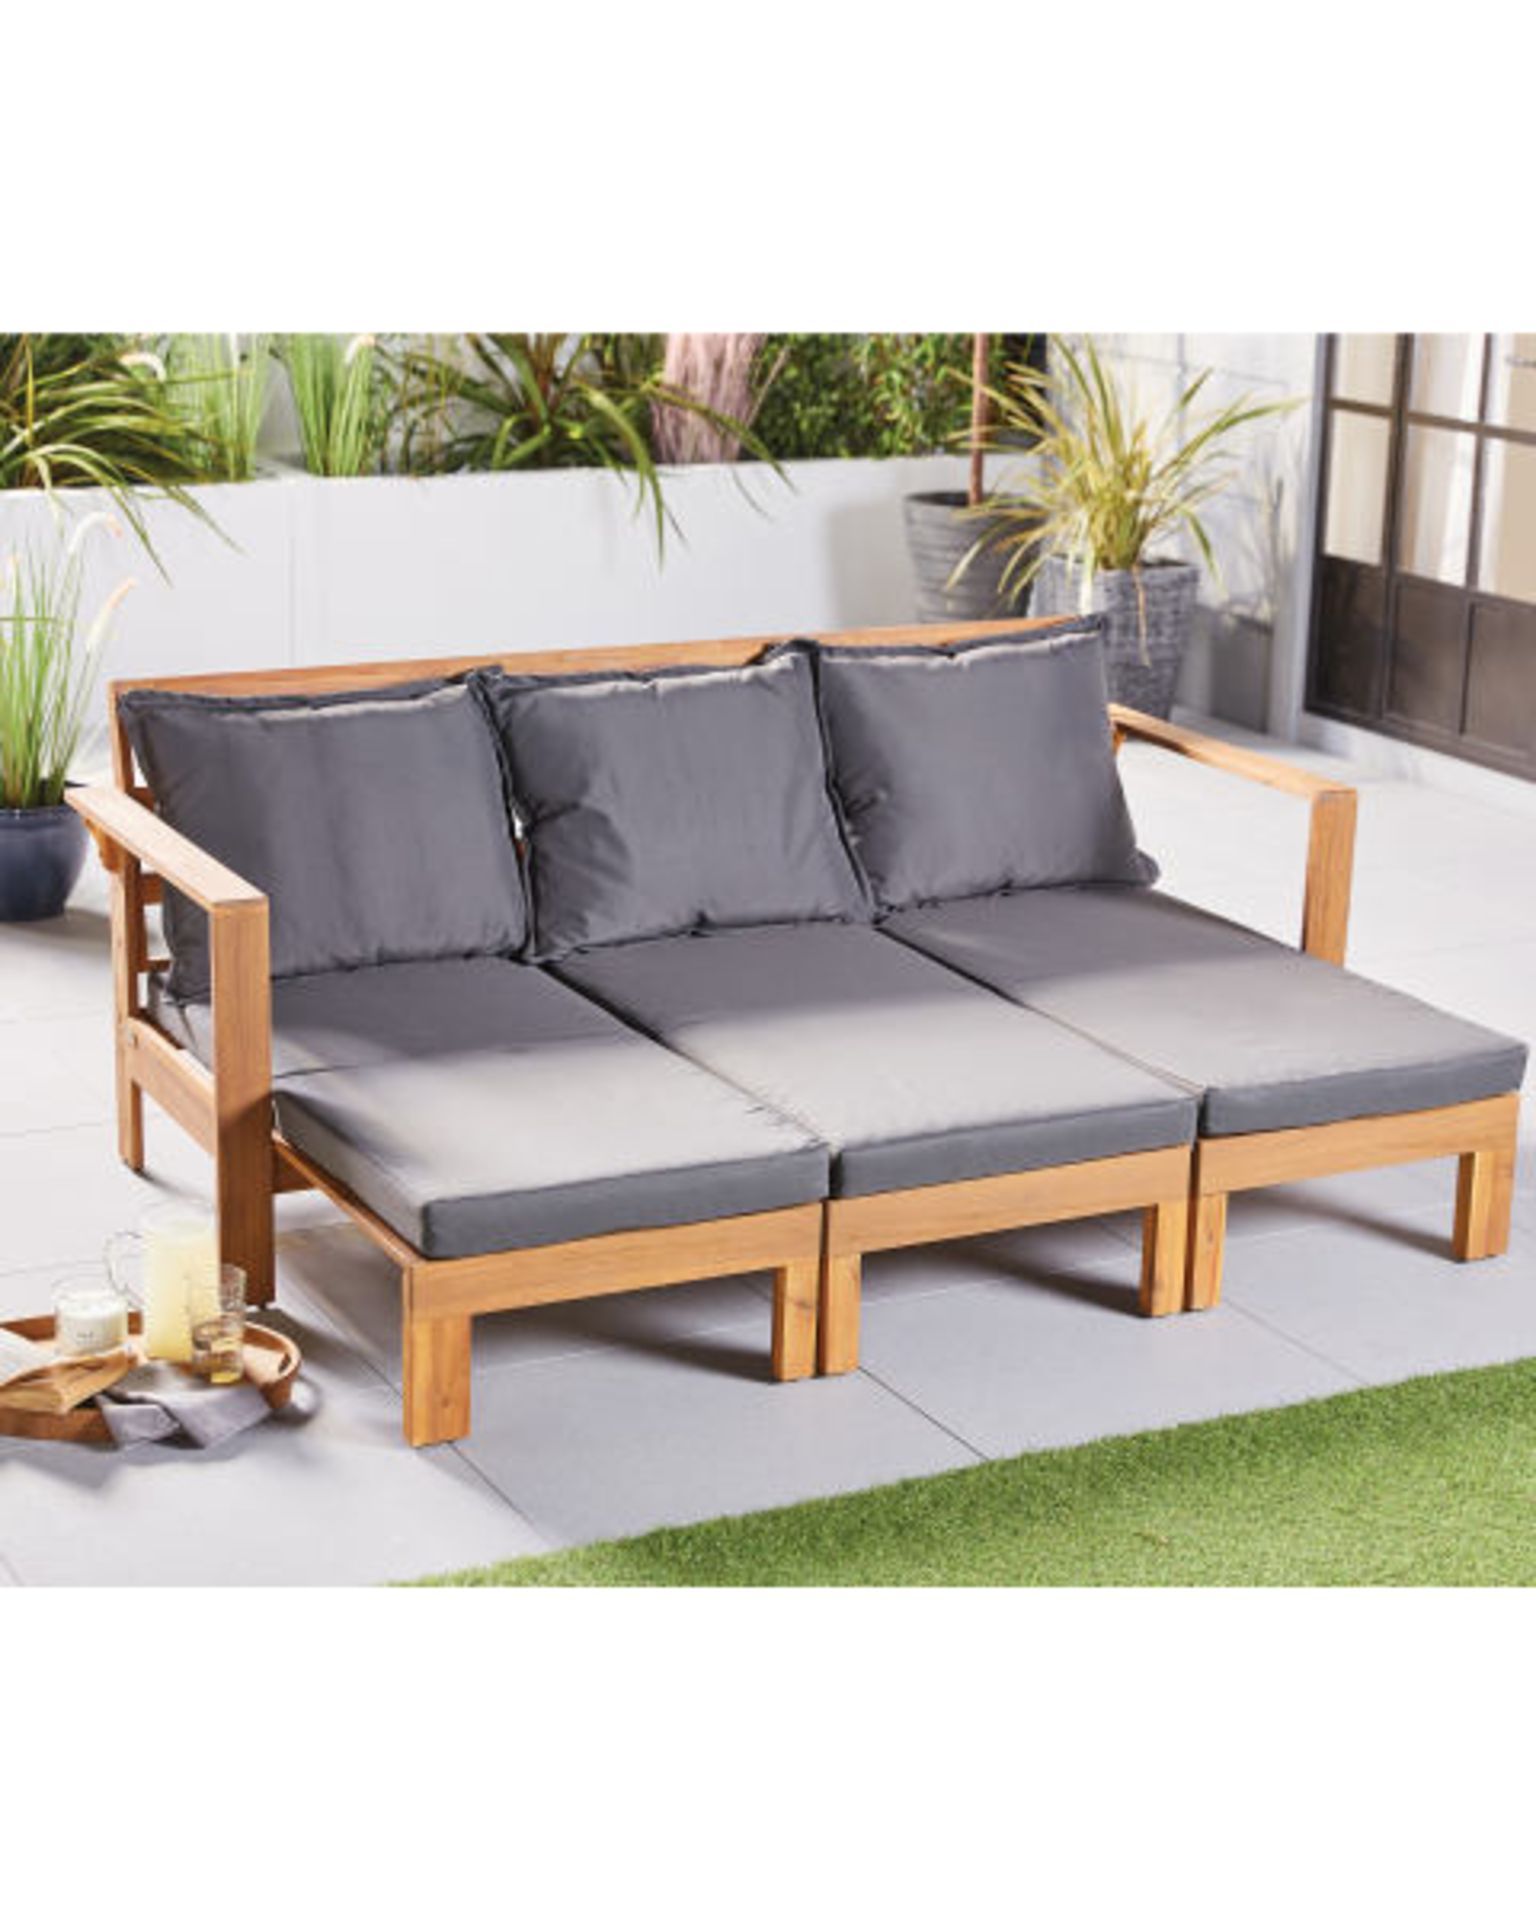 *LATE ADDED LOT* Luxury Wooden Garden Day Bed. Create a place of outdoor comfort with this stylish